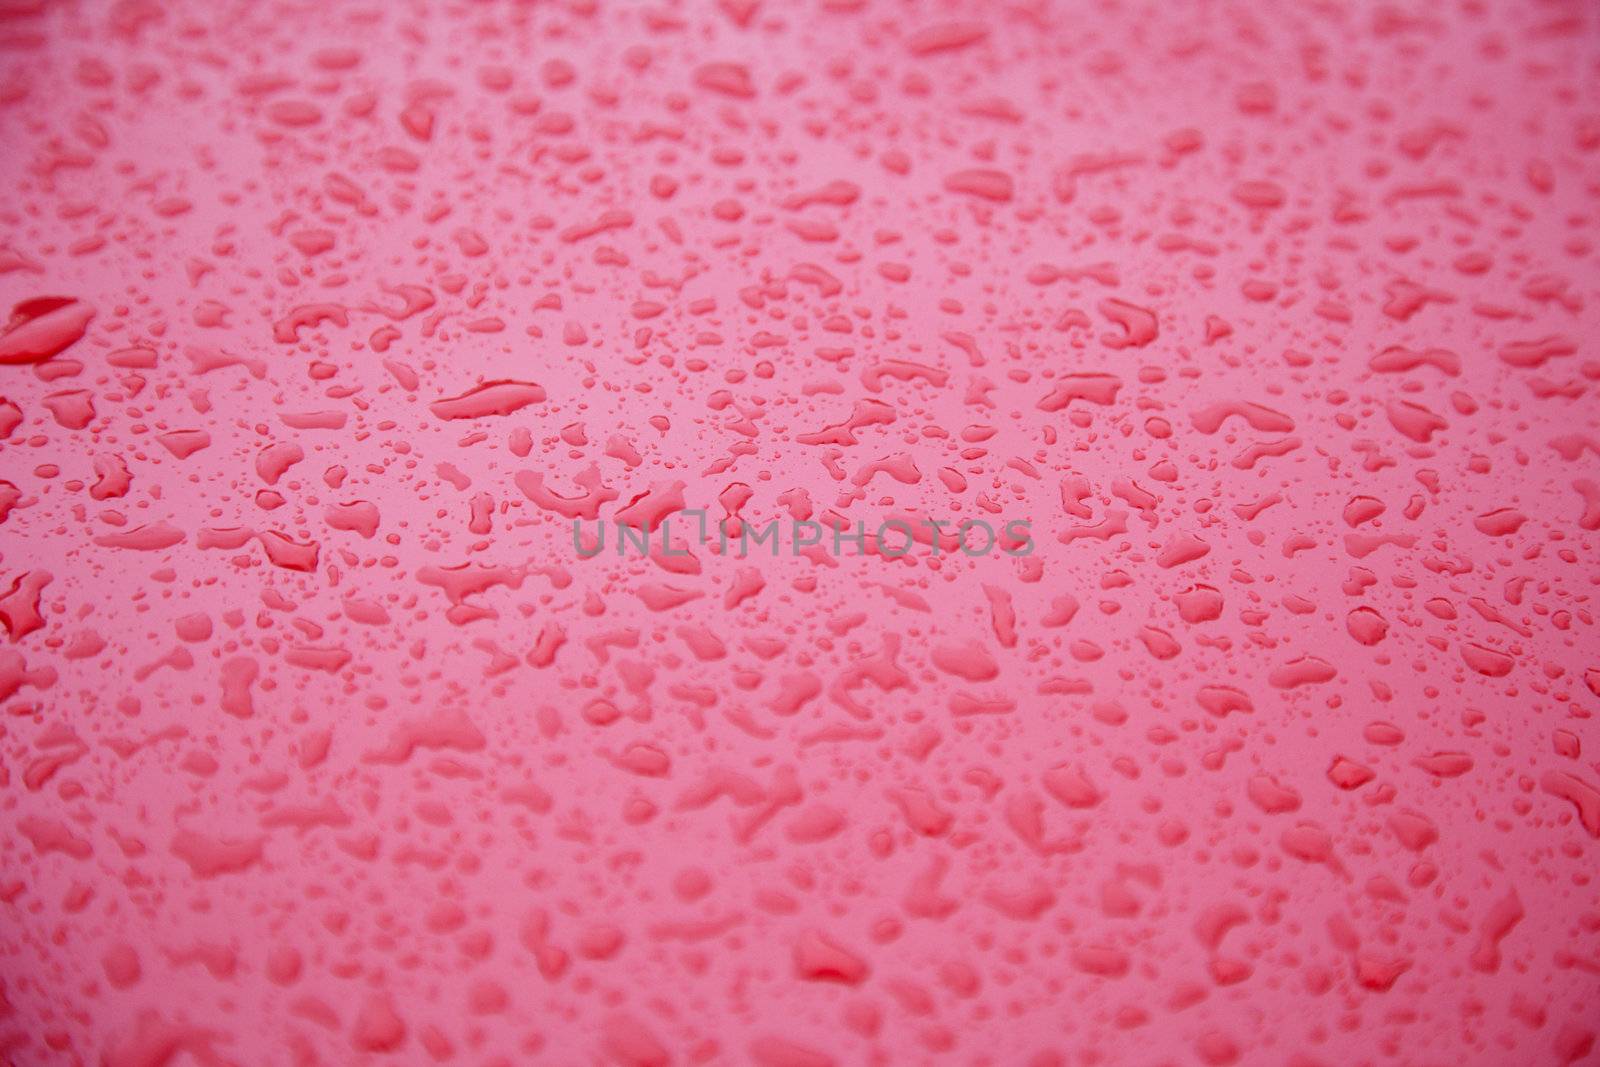 Polished surface of the car bonnet with water drops